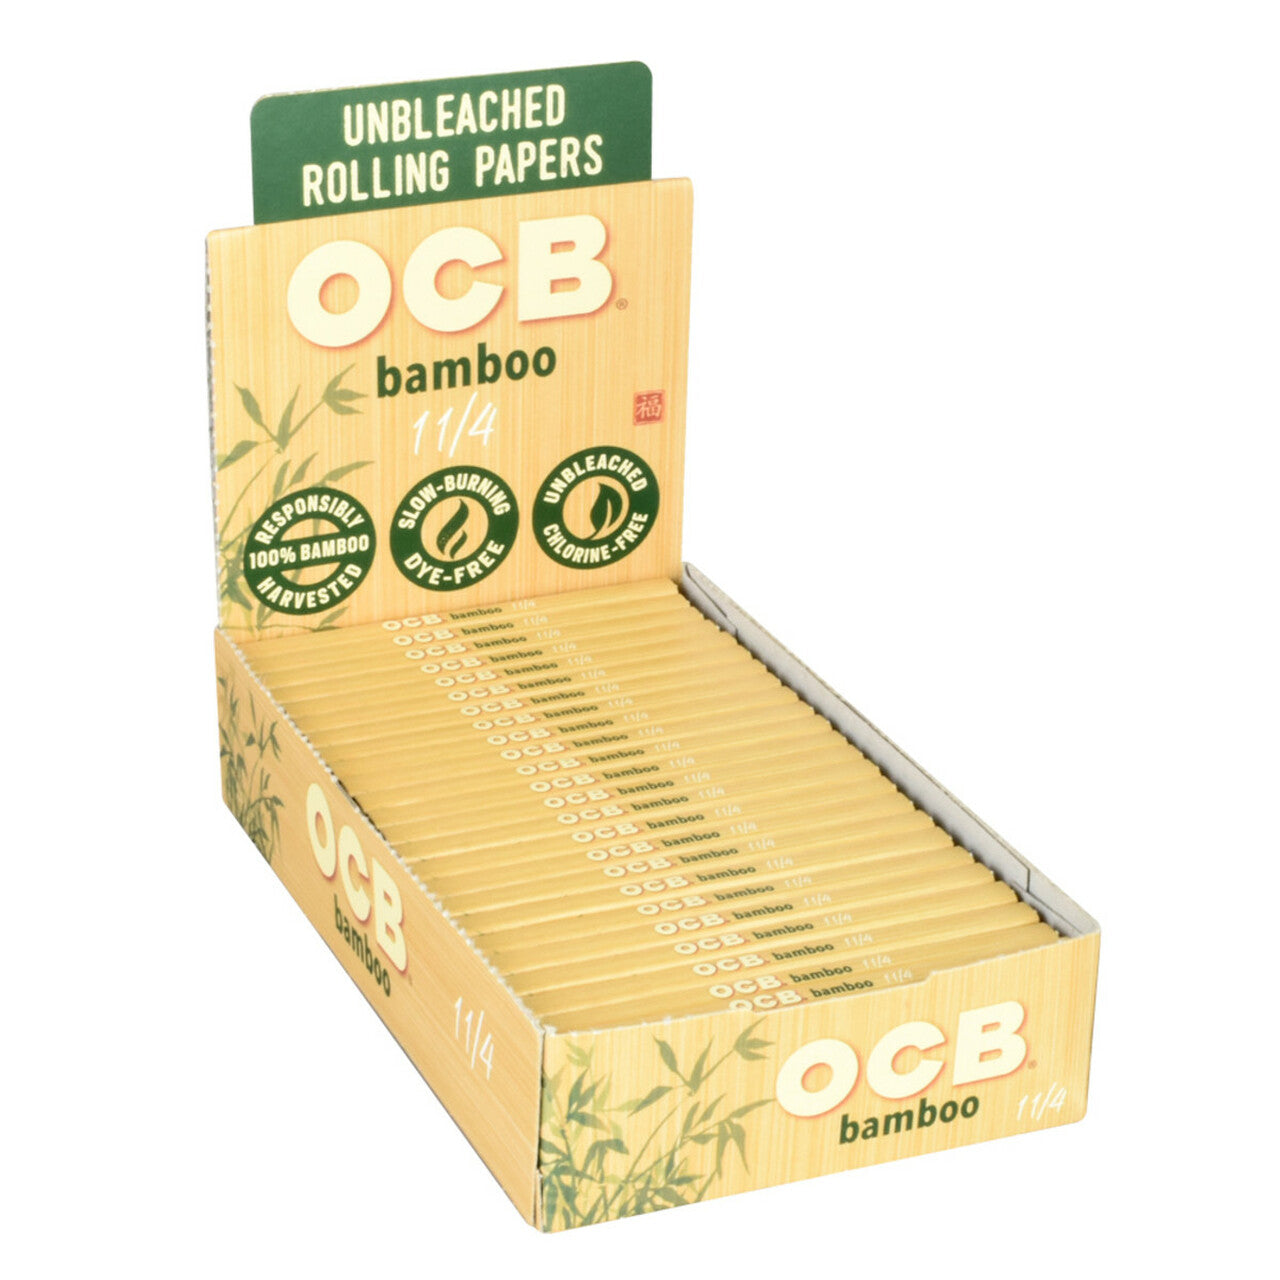 ocb bamboo rolling papers unbleached display box